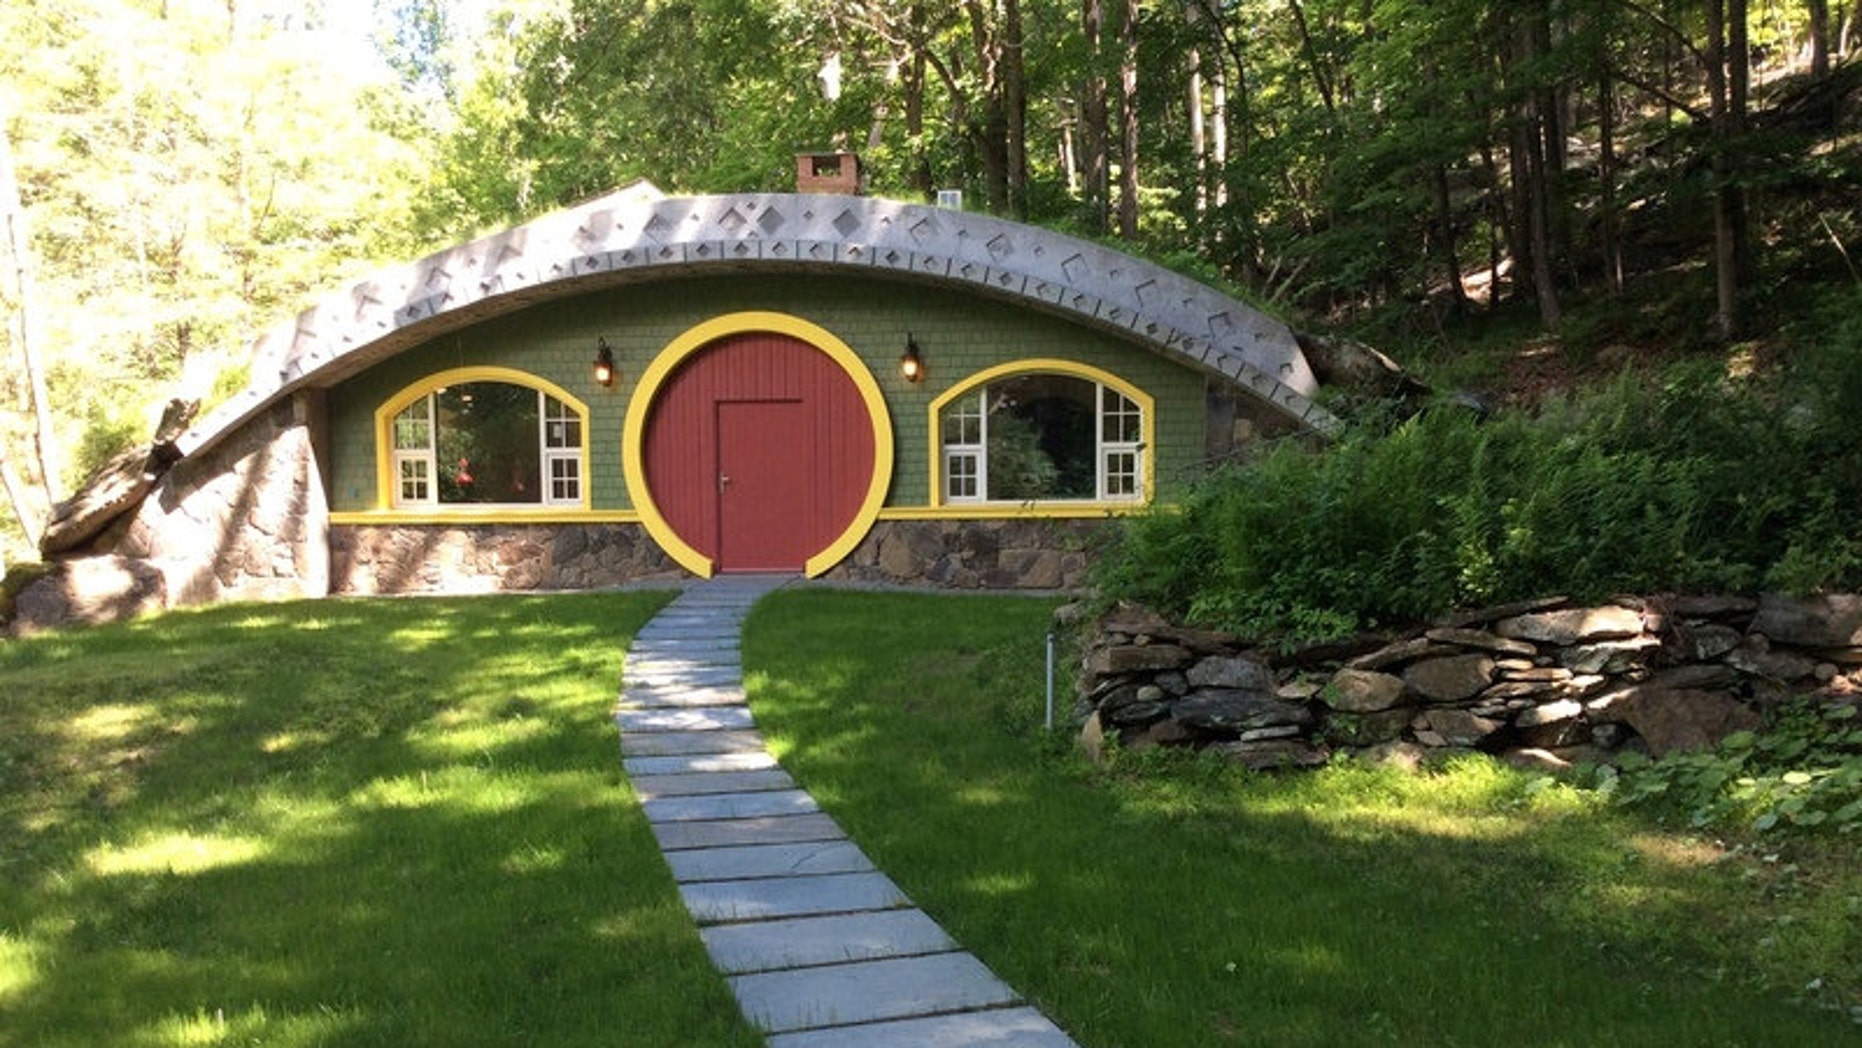 Real-life Hobbit house inspired by 'Lord of the Rings' on the market in